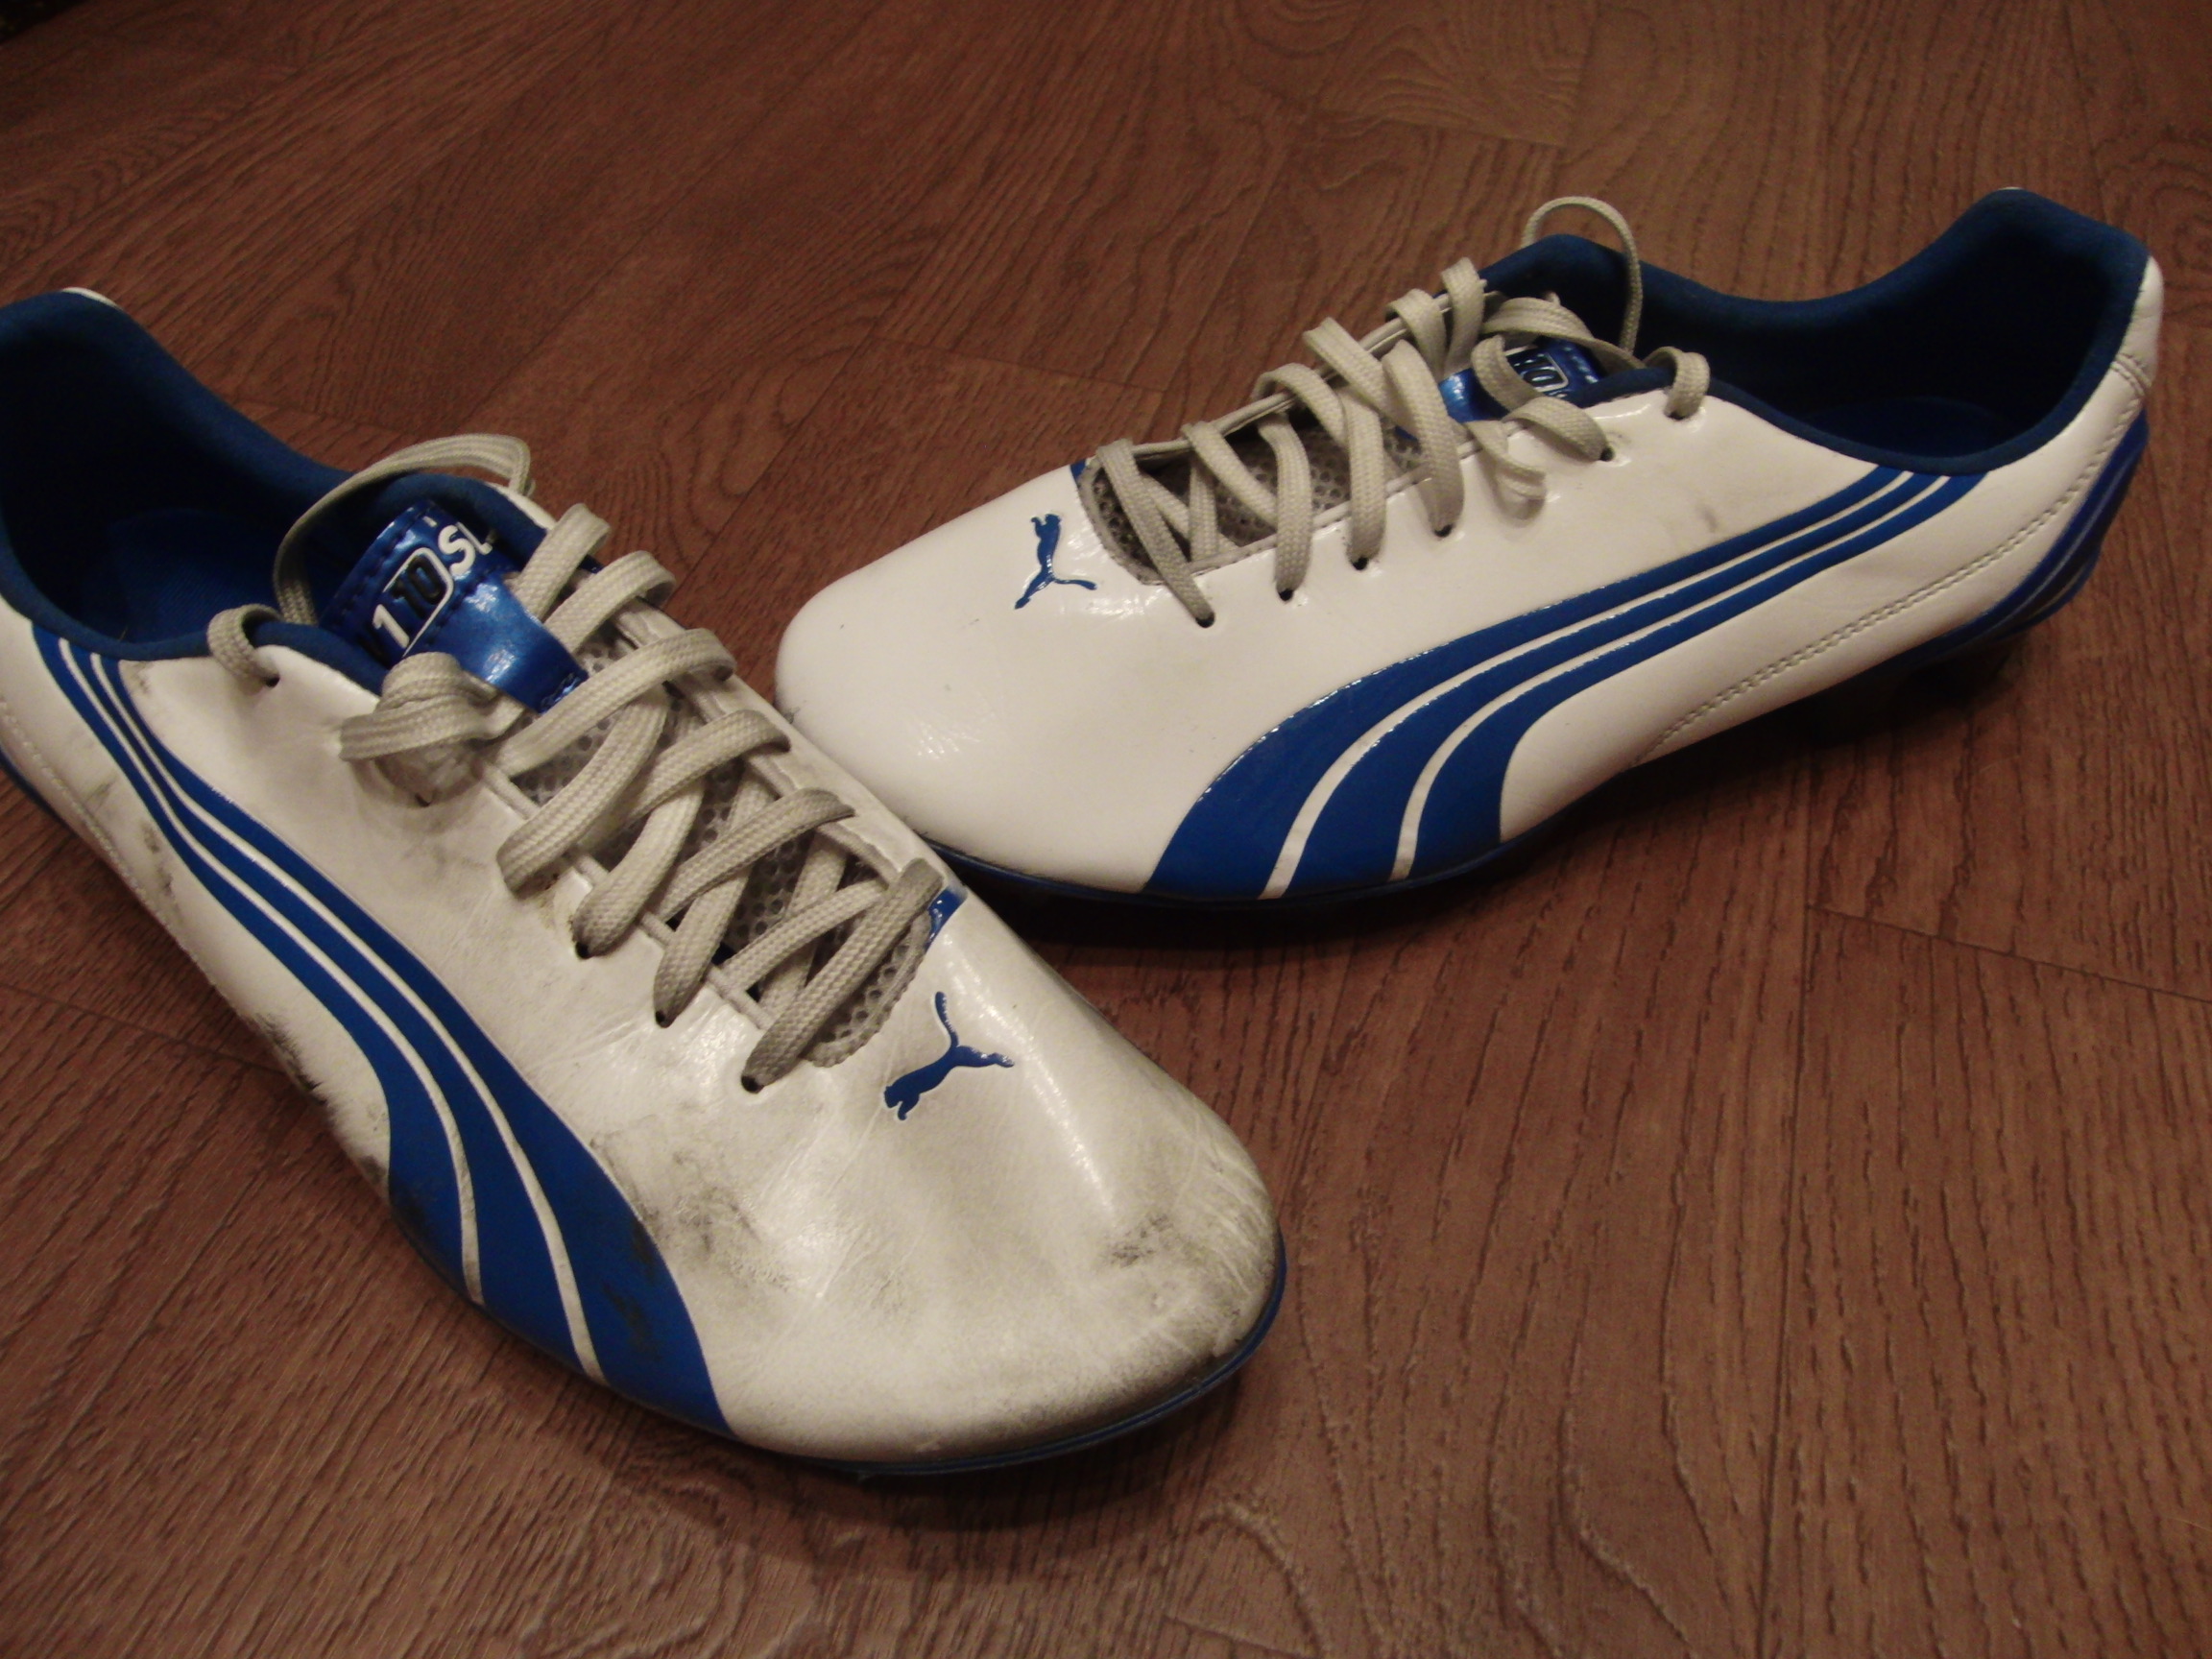 Boots,Studs, Style: Puma V1.10 SL Review